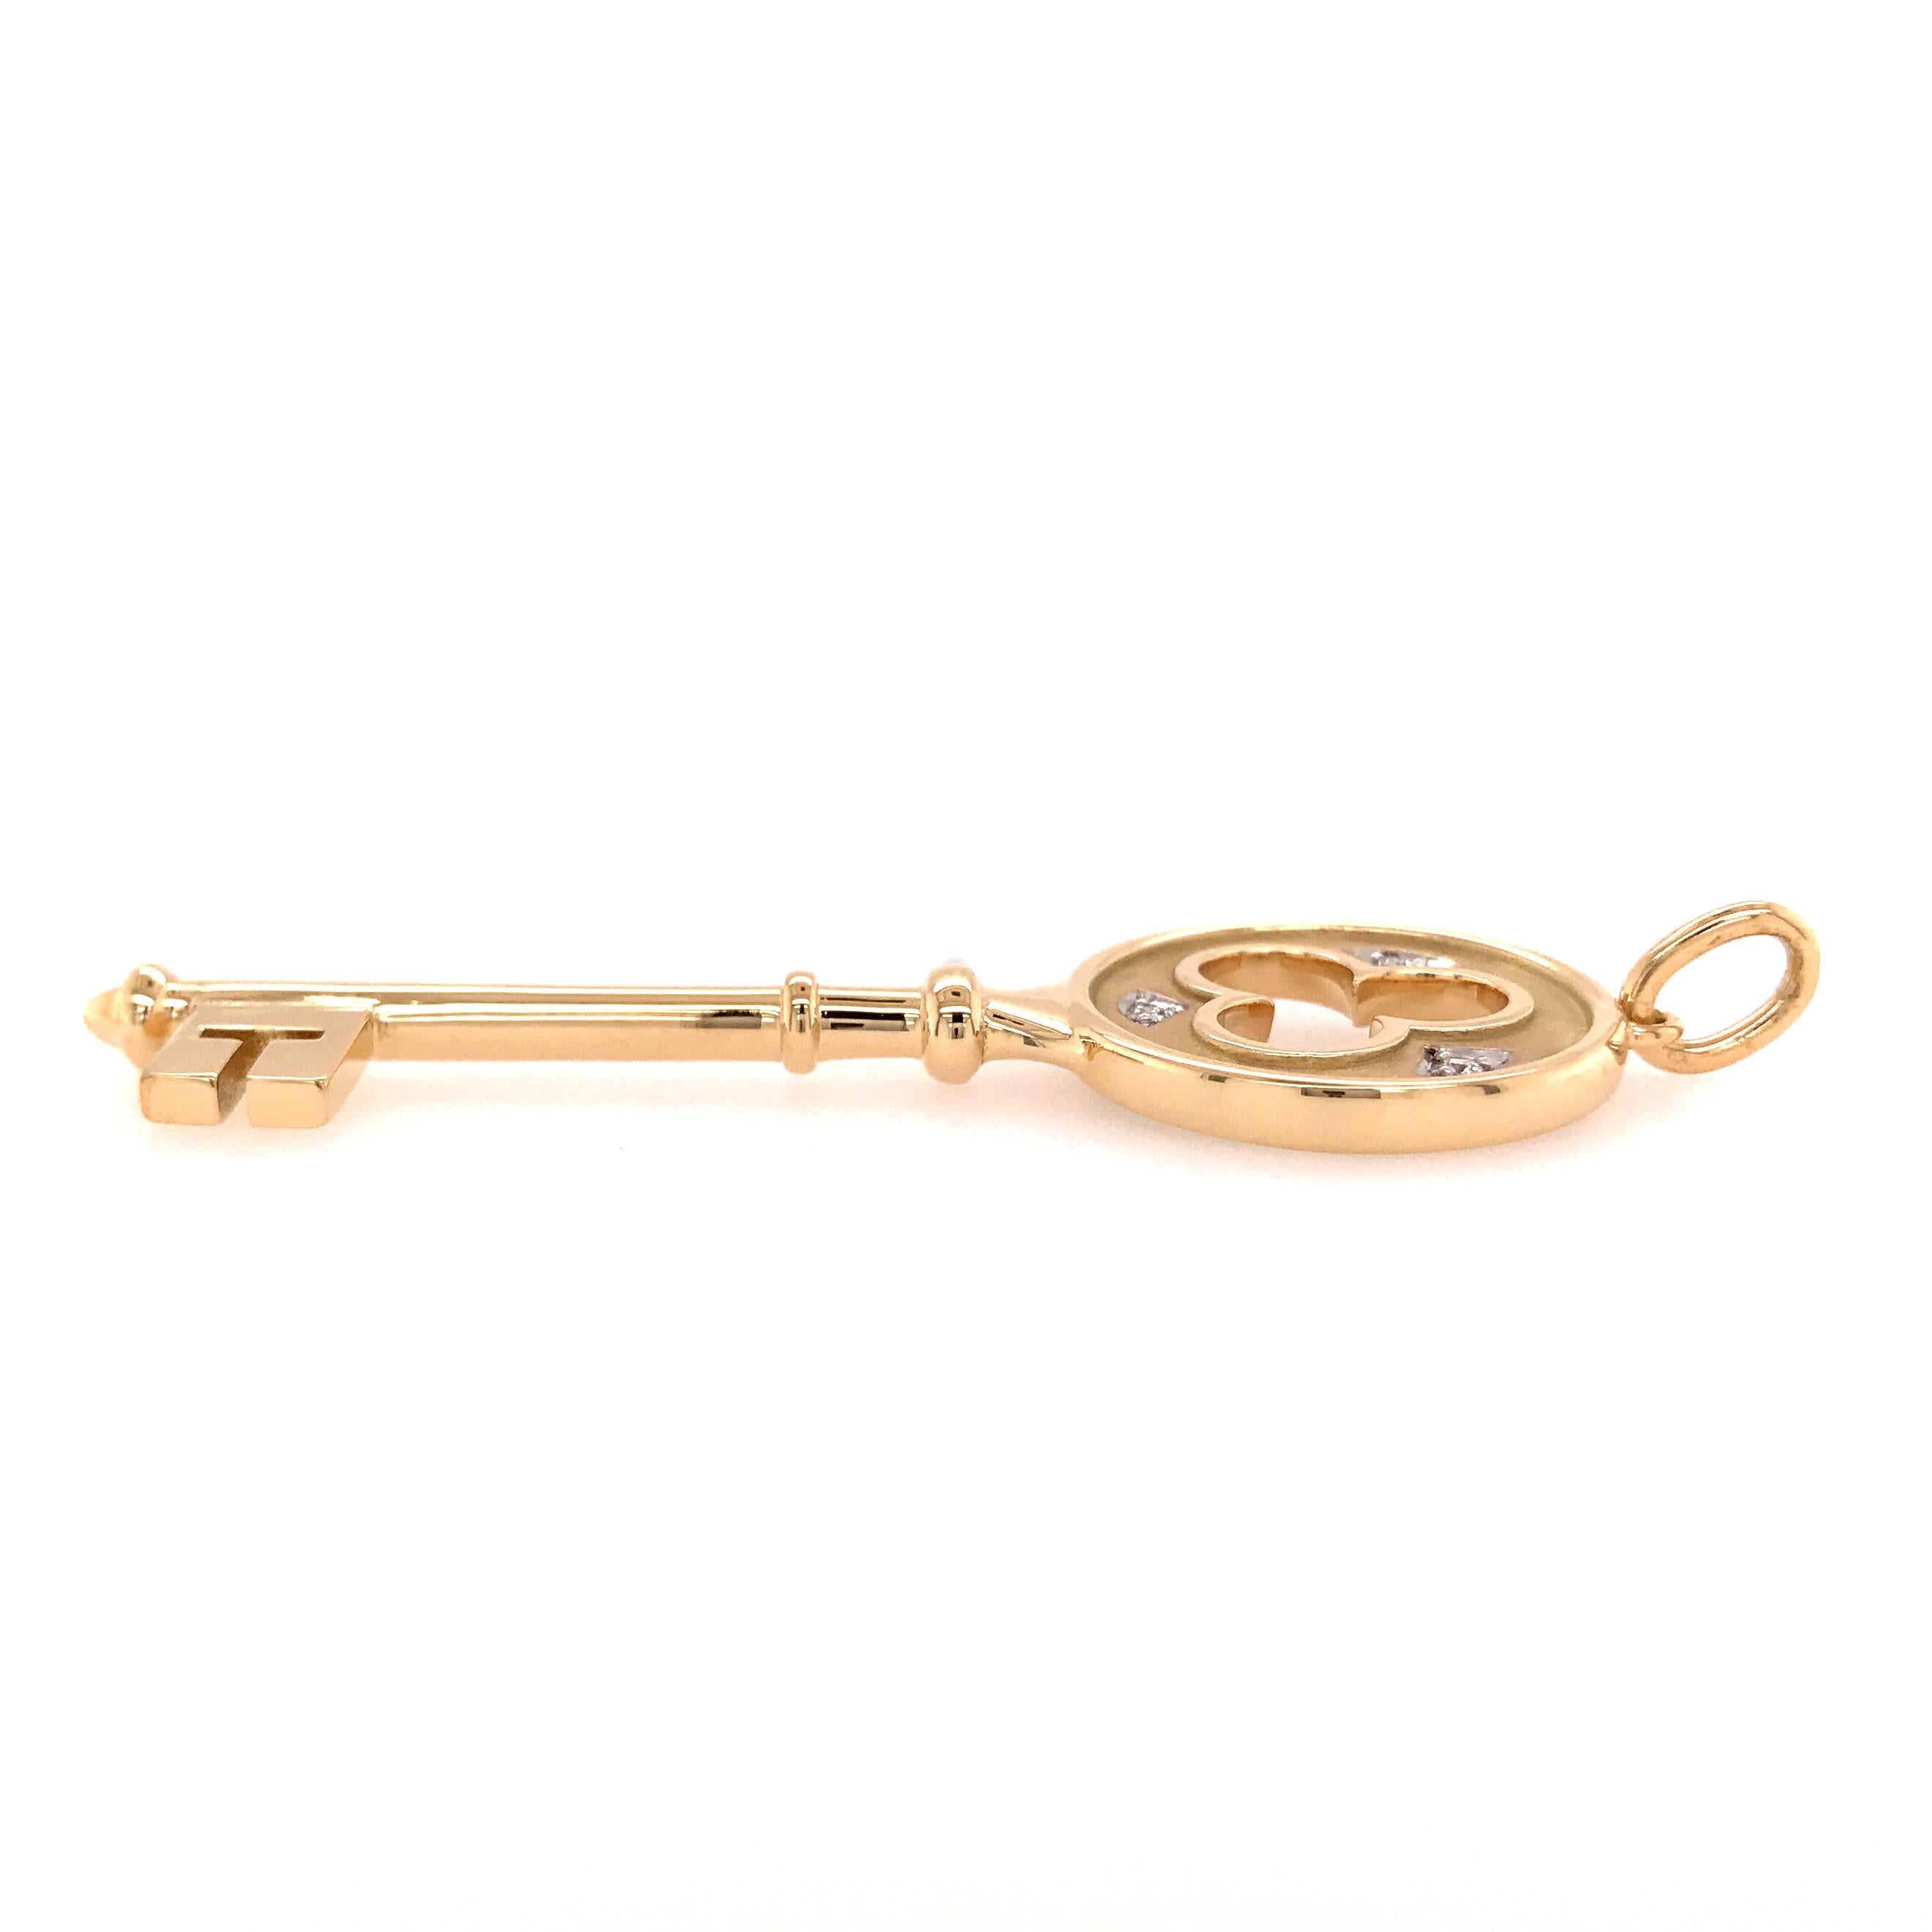 Tiffany & Co. Three-Clover Key Pendant in 18K Yellow Gold.  (3) Round Brilliant Cut Diamonds weighing 0.12 carat total weight, F-G in color and VS in clarity are prong set around the three-leaf clover.  The key measures 2 1/4 inch in length and 3/4